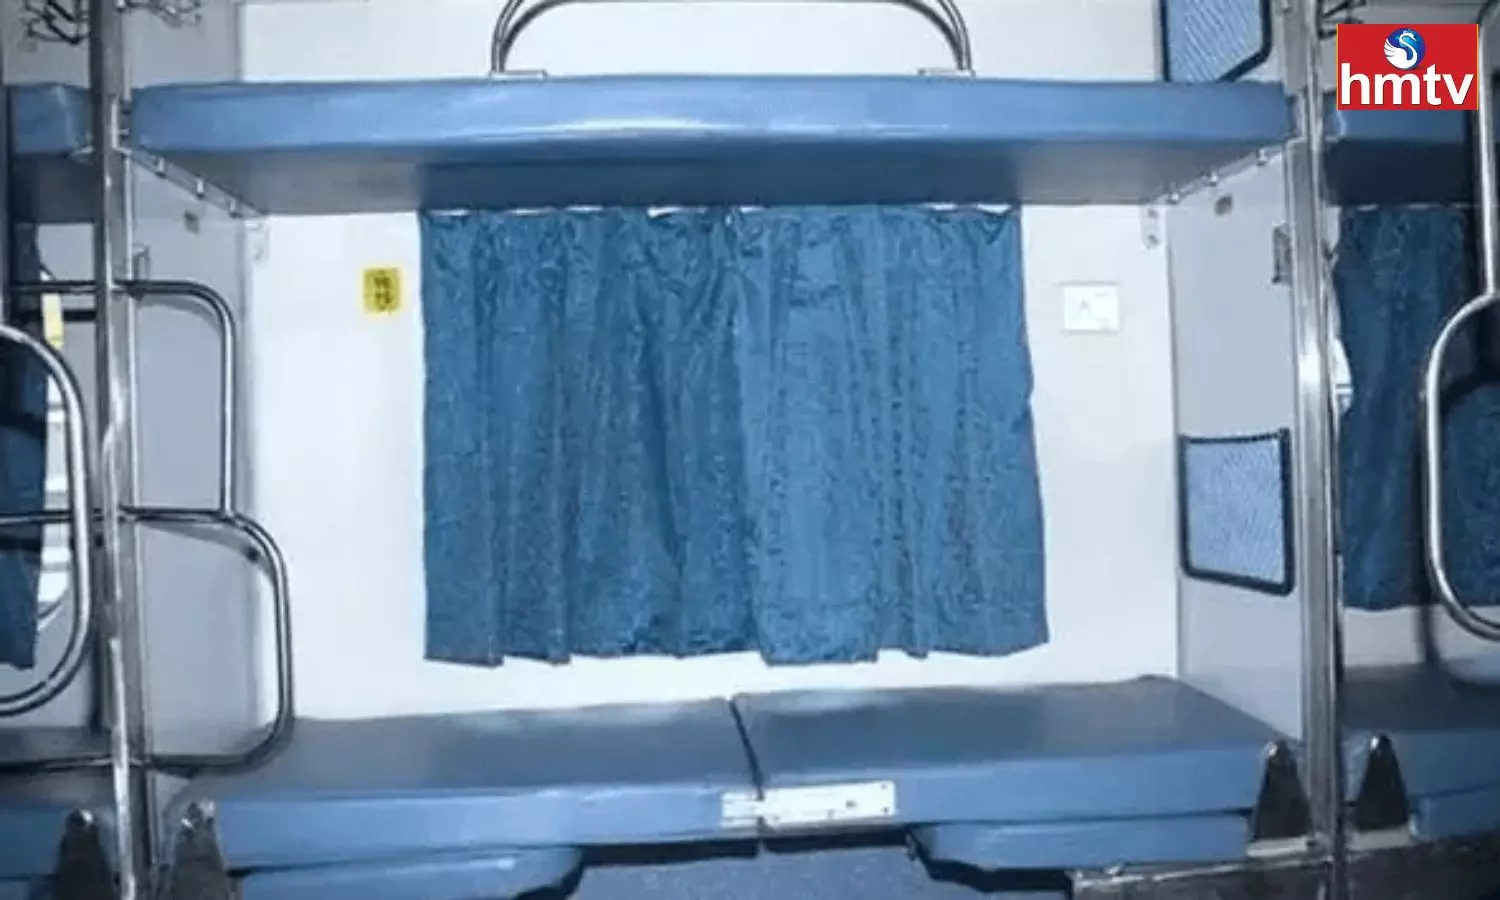 Indian Railway May Provide Full Bed Roll Kit in AC Coach to RAC Ticket Passengers Check New Rules